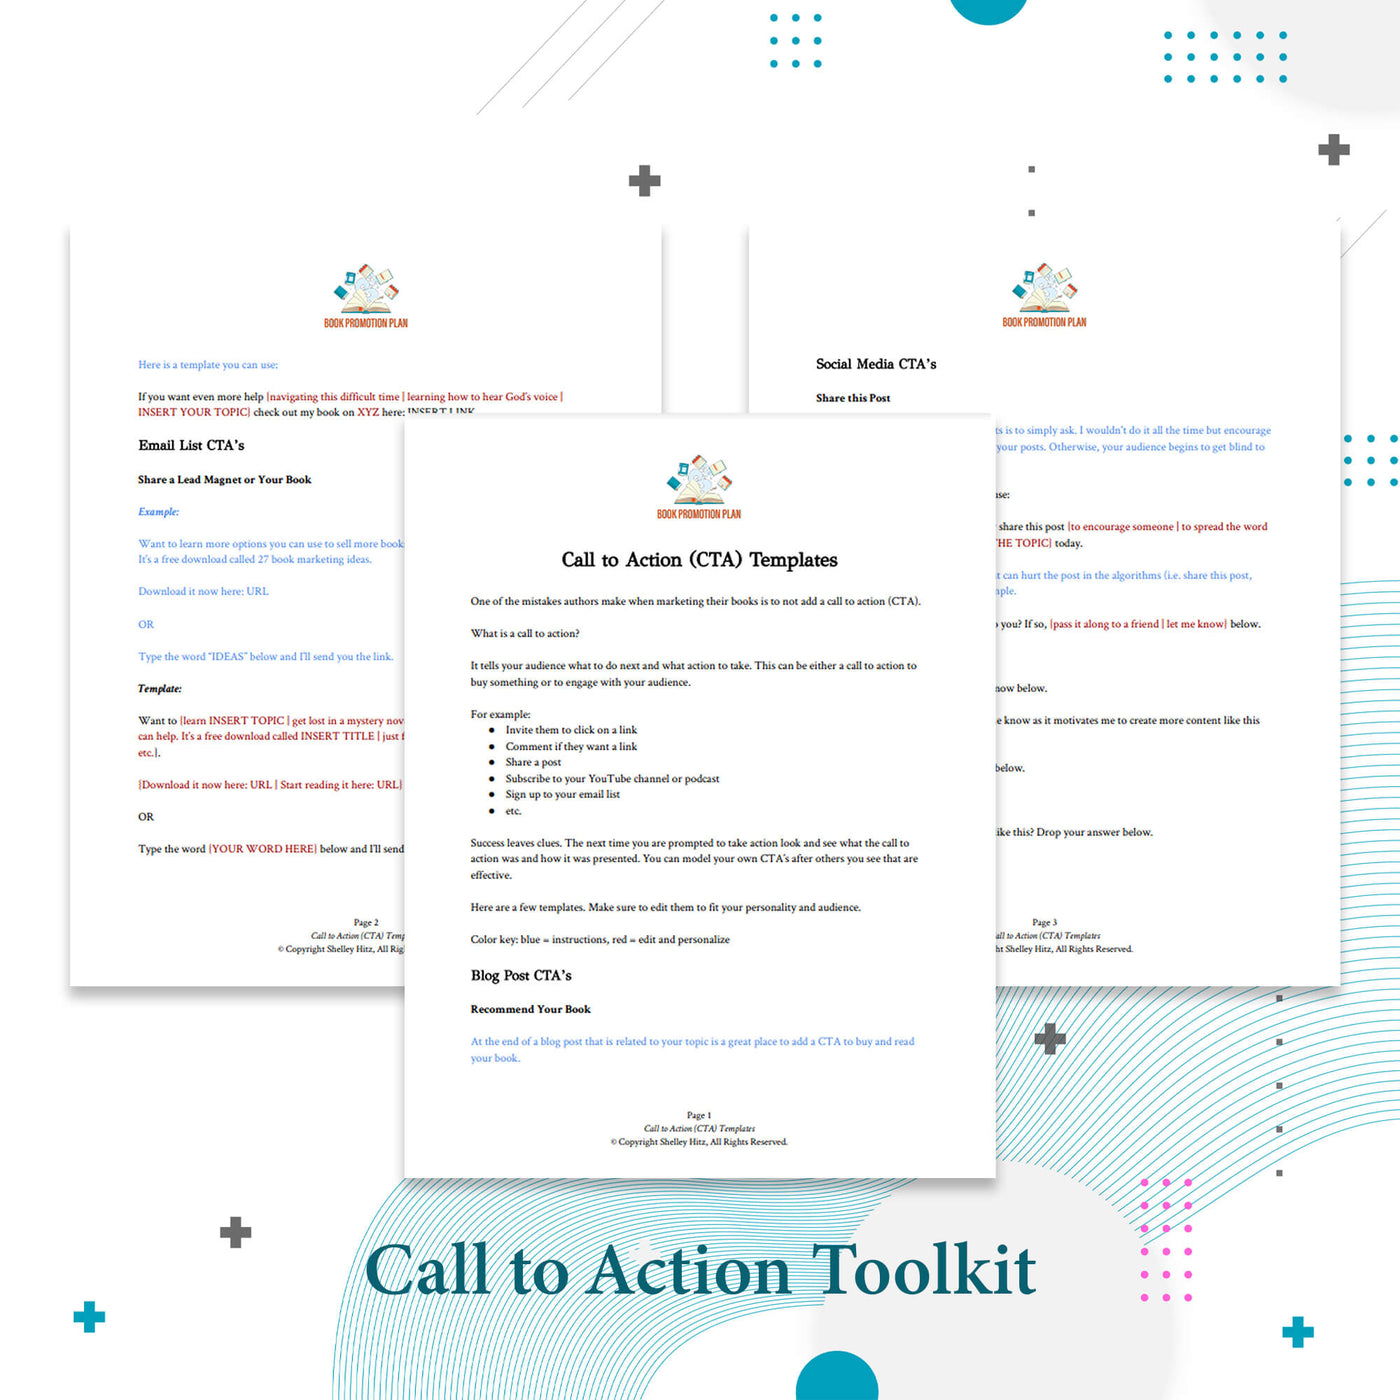 Call to Action Toolkit